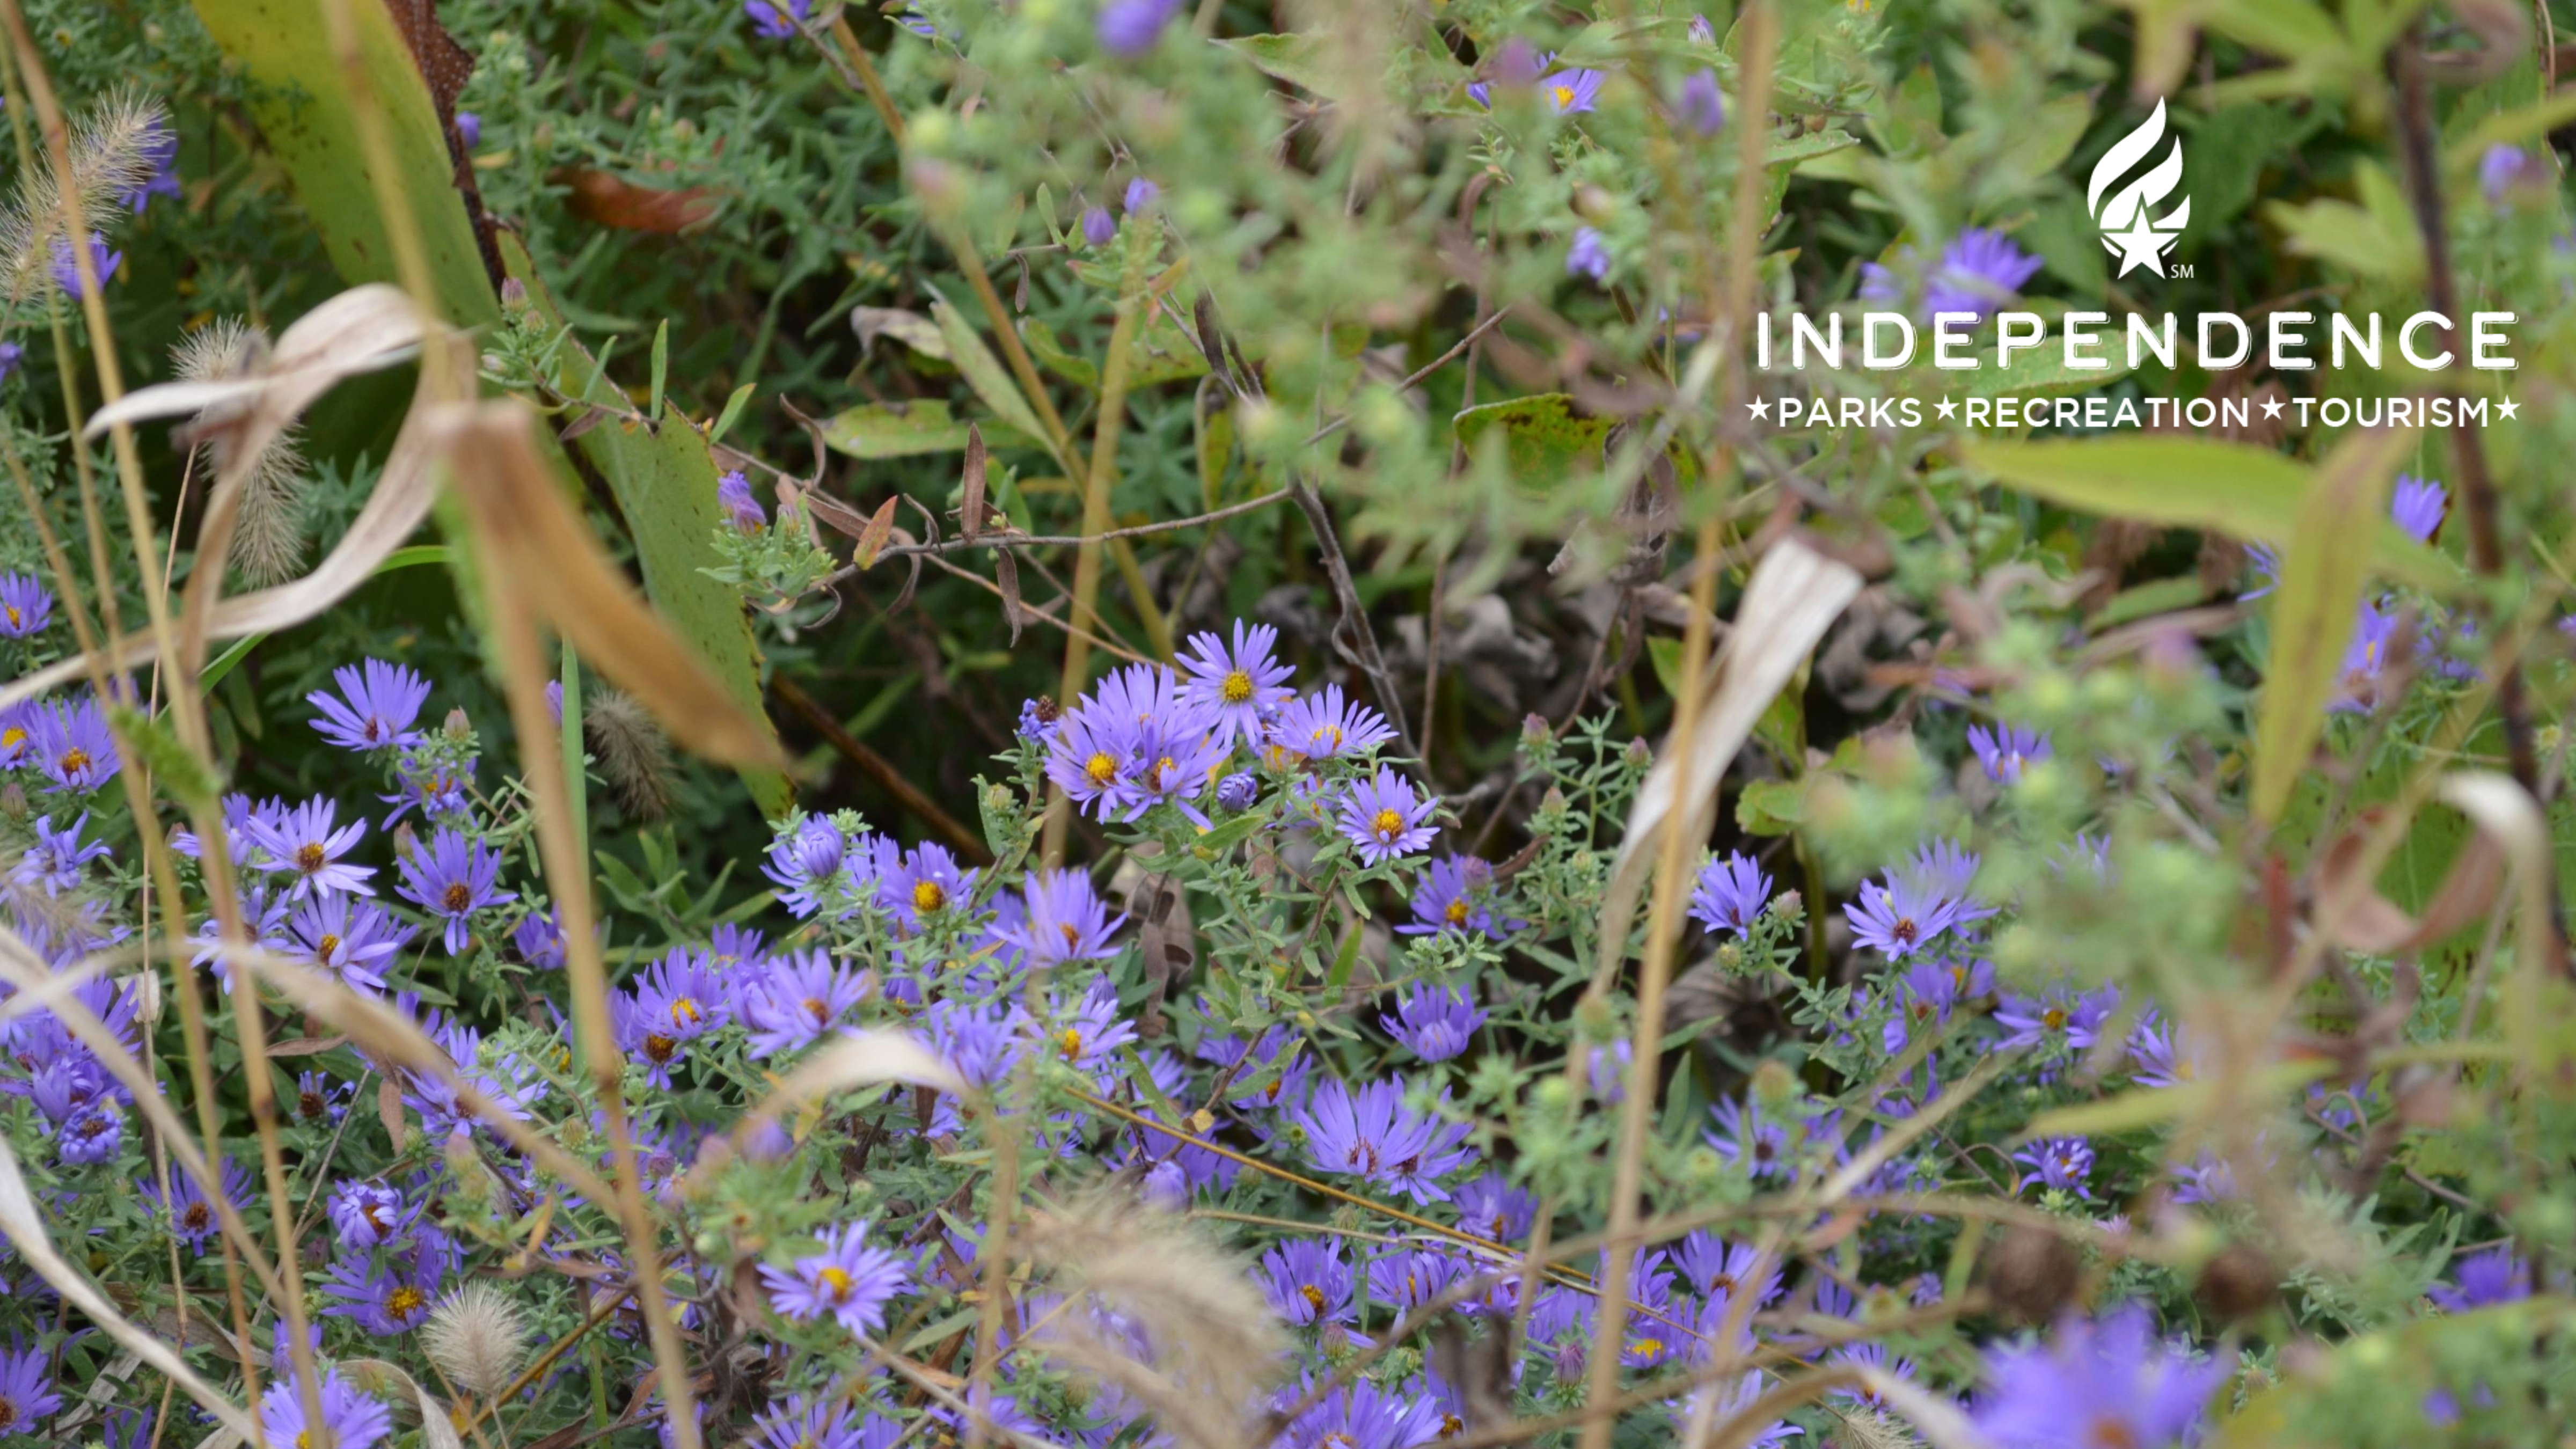 Image of purple flowers taken at George Owens Nature Park with a white City of Independence logo in the upper right corner